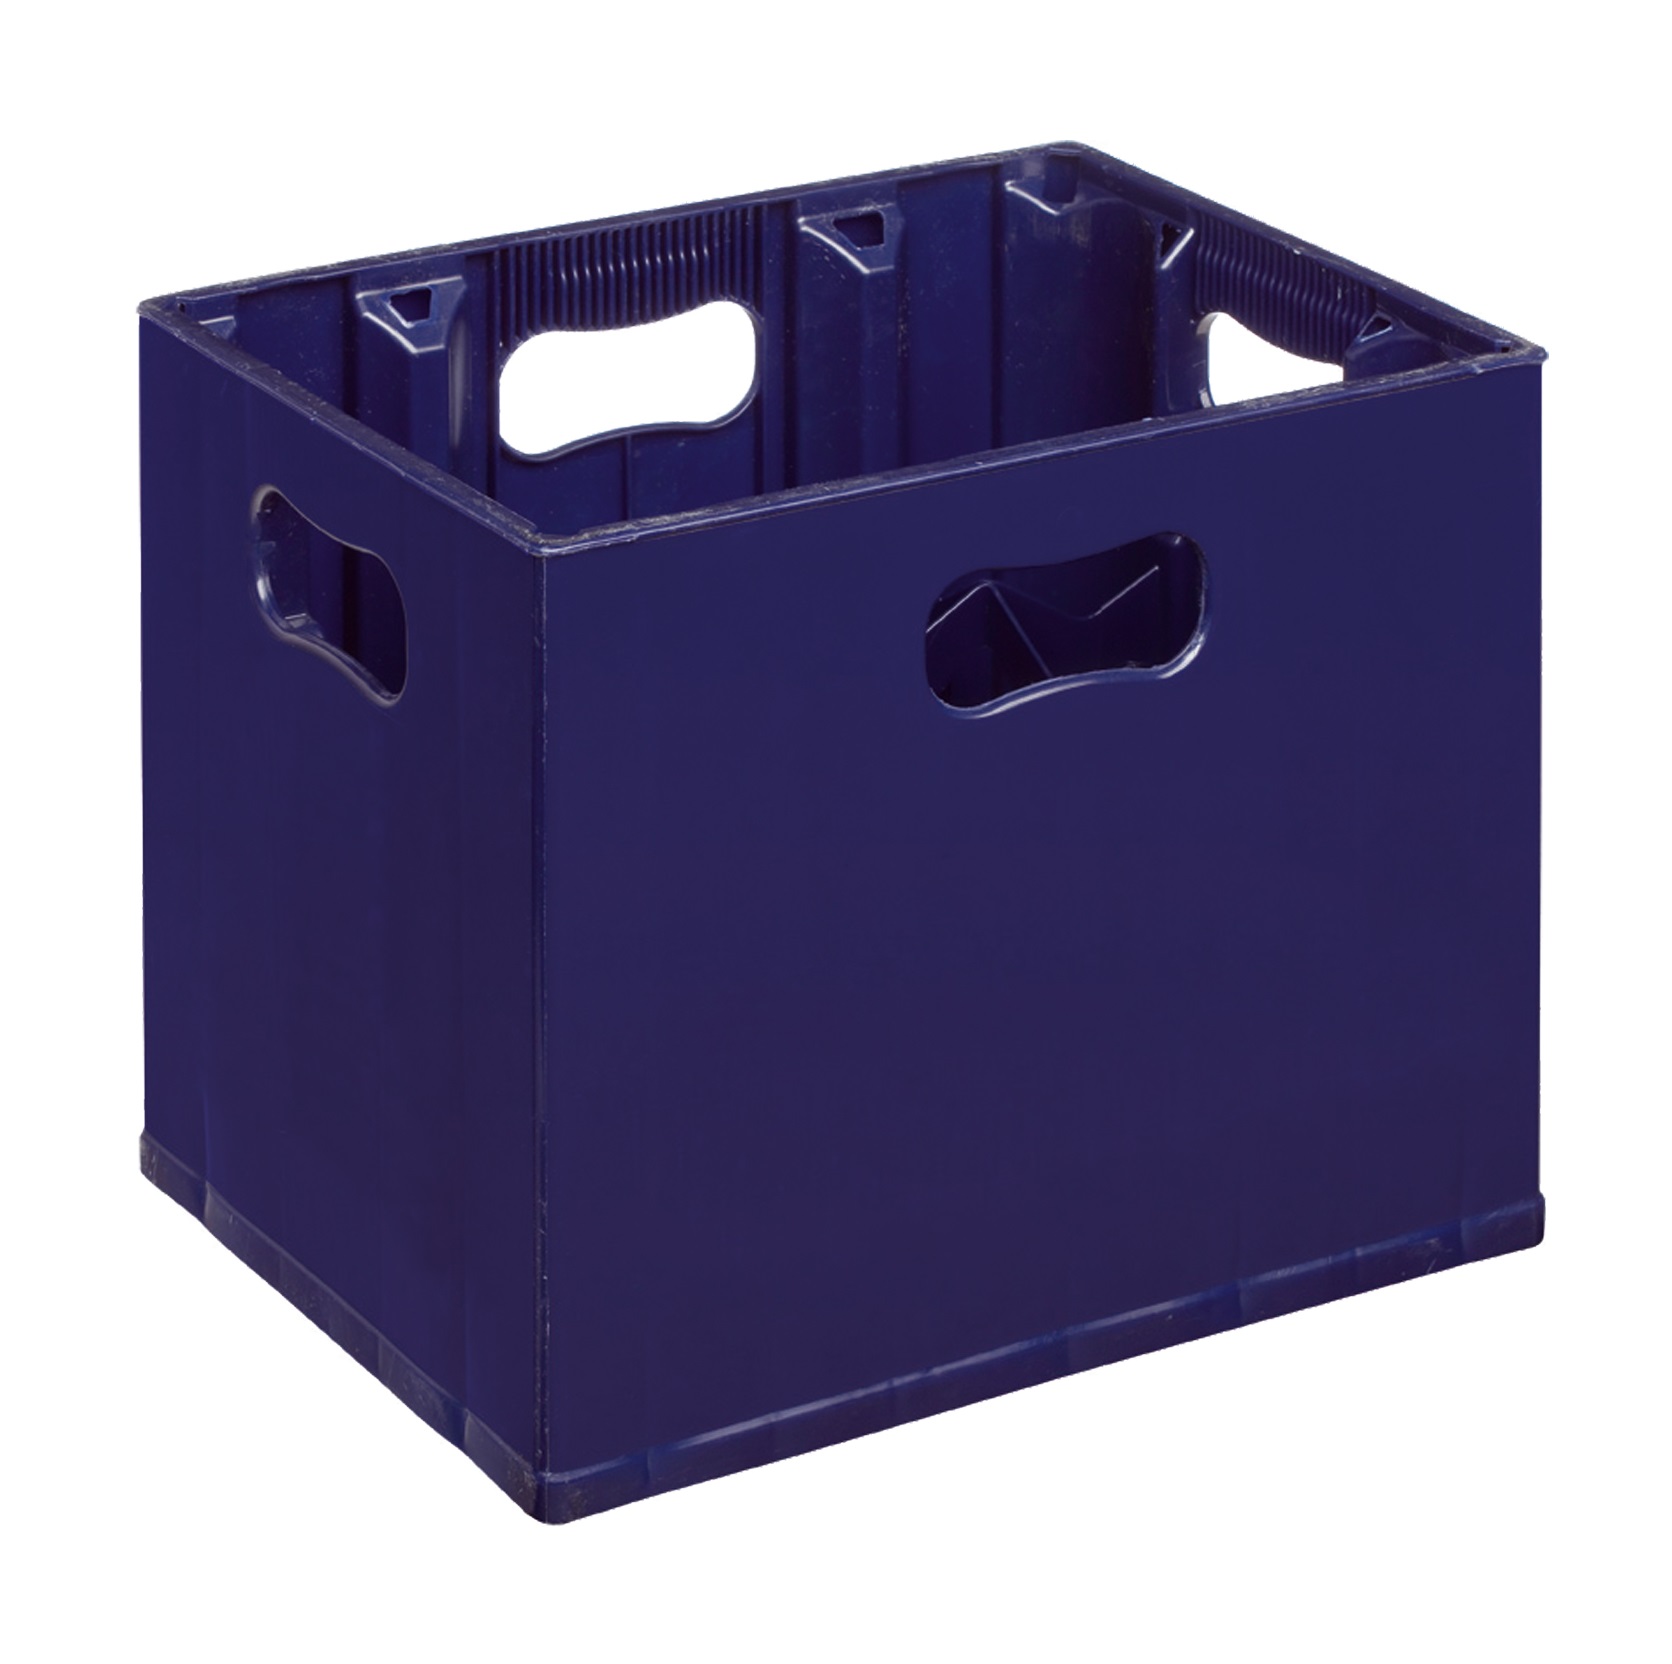 12 x 1 Litre Wine Bottle Plastic Stacking Crate